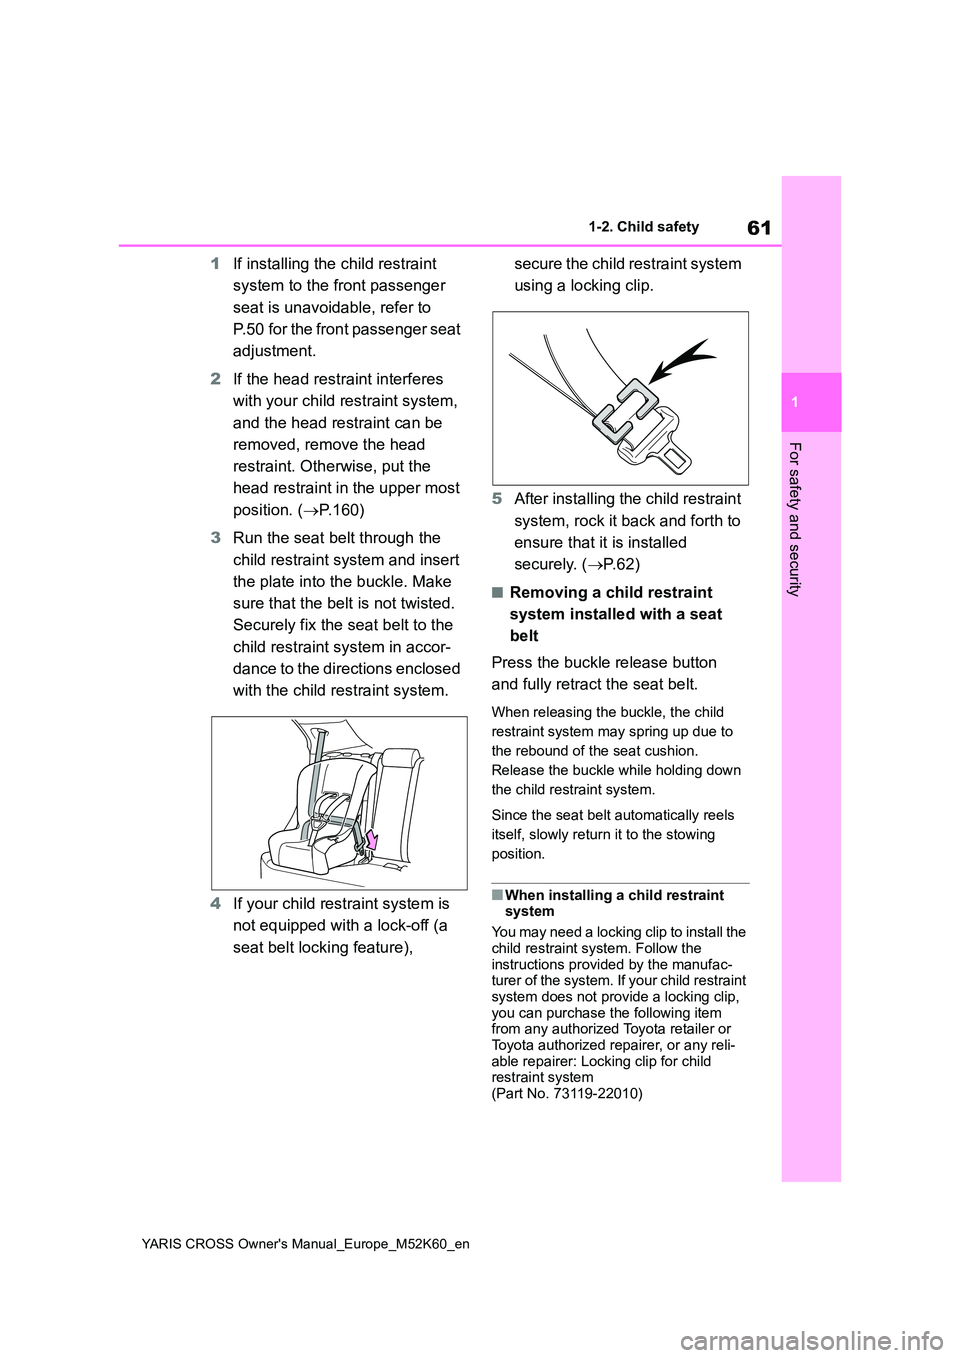 TOYOTA YARIS CROSS 2021  Owners Manual 61
1
YARIS CROSS Owner's Manual_Europe_M52K60_en
1-2. Child safety
For safety and security
1If installing the child restraint  
system to the front passenger  
seat is unavoidable, refer to  
P.50